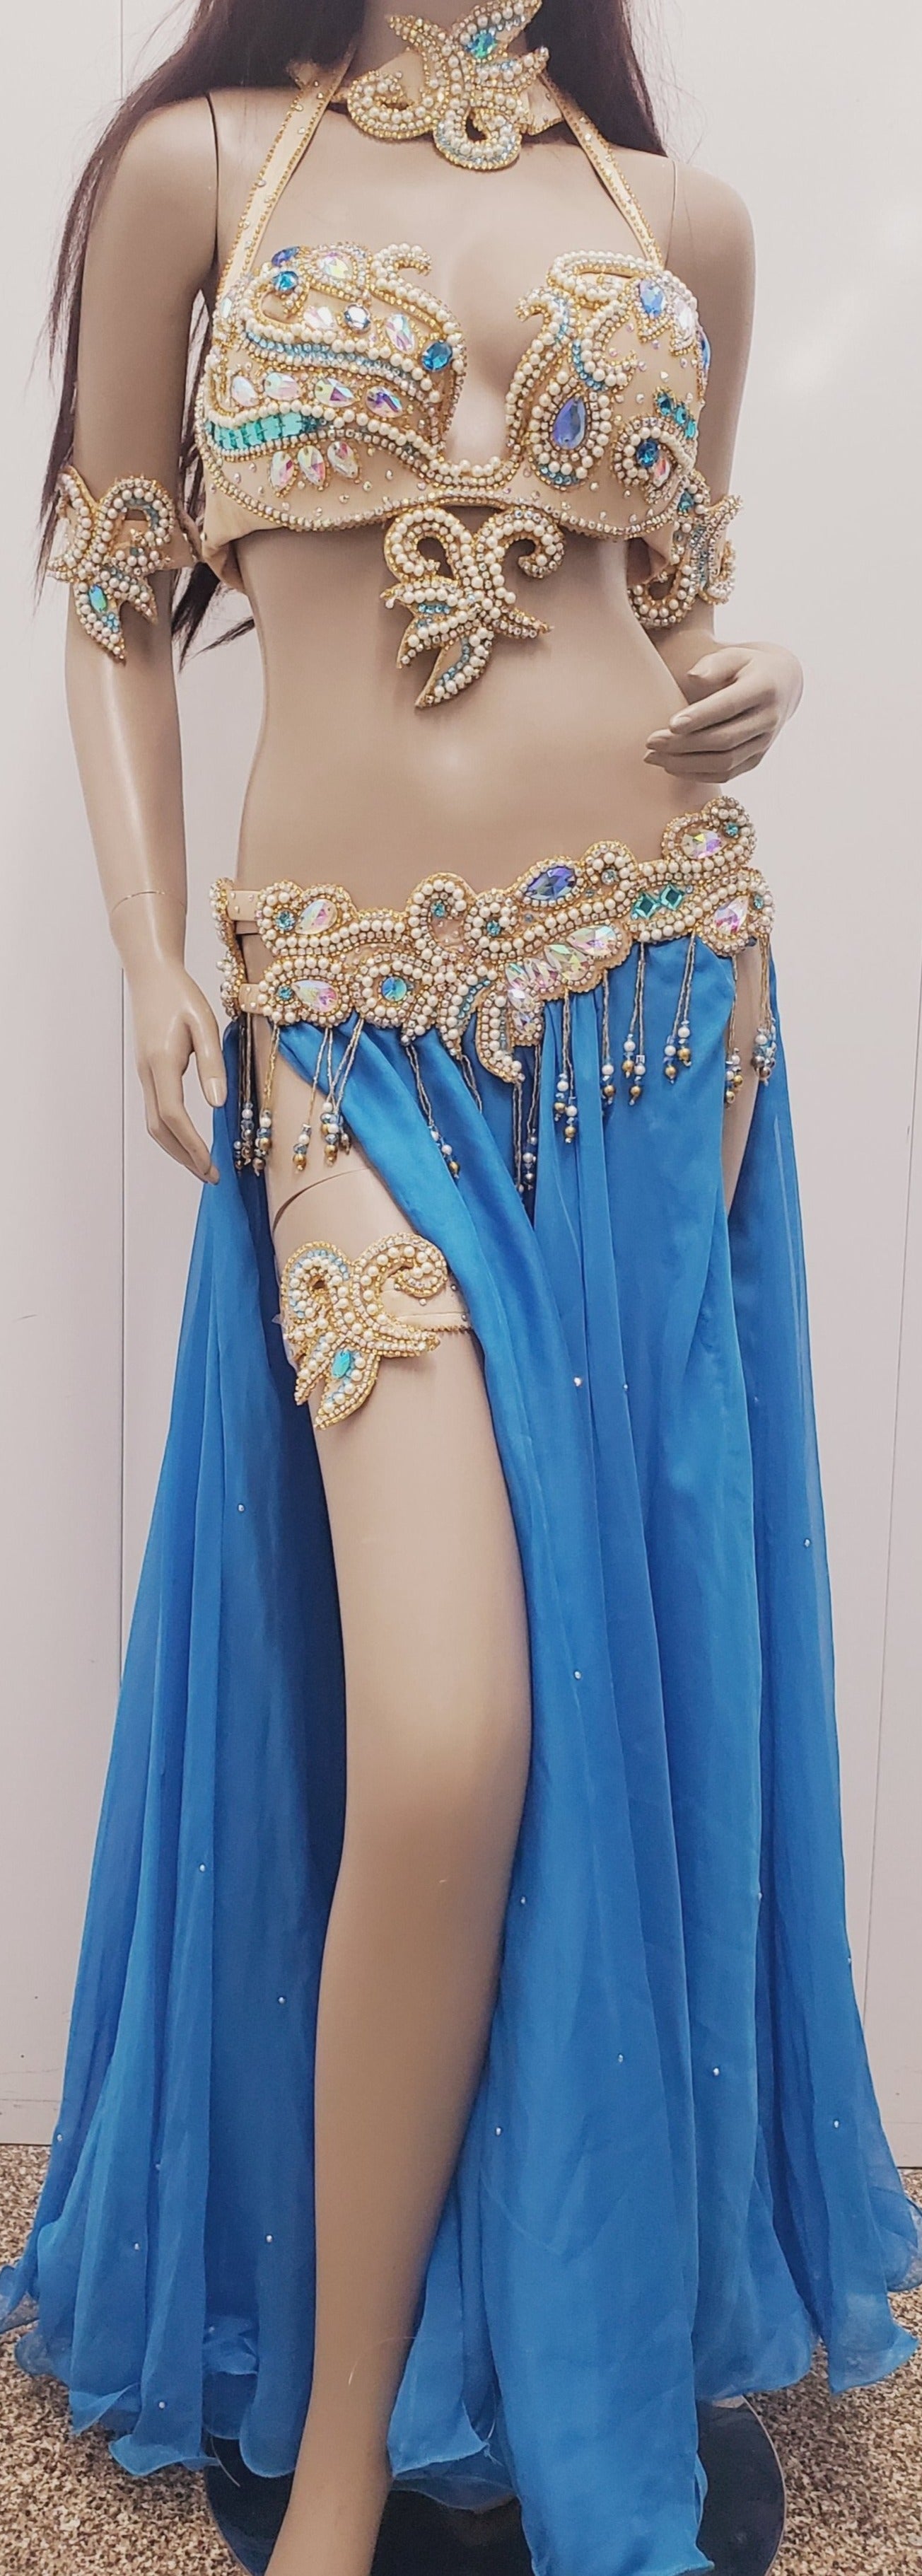 Buy Best Belly Dance Accessories Online At Cheap Price, Belly